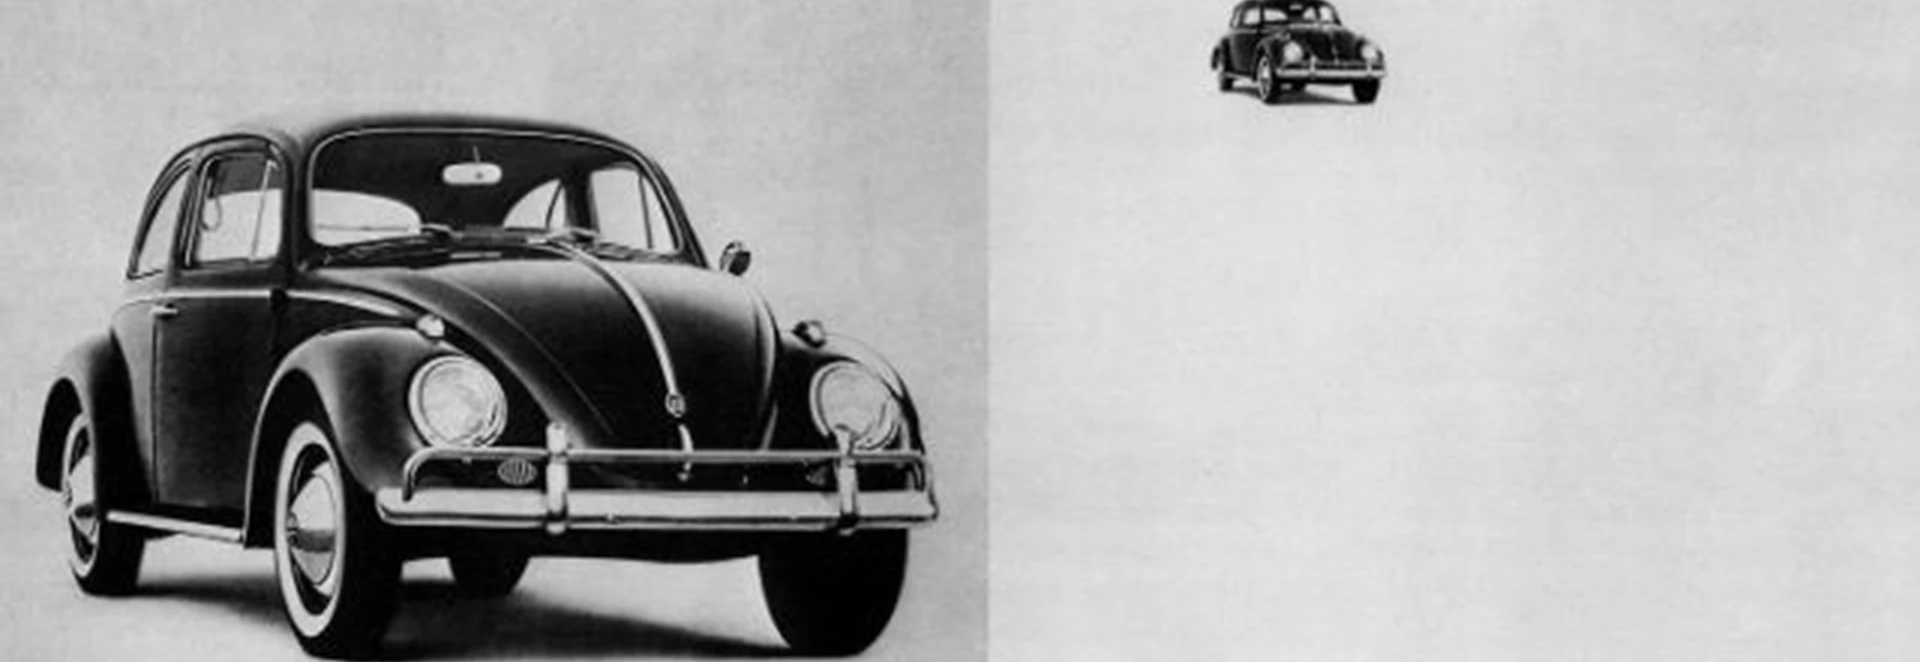 The Volkswagen Beetle: From Hitler’s pet project to the world’s best-loved car